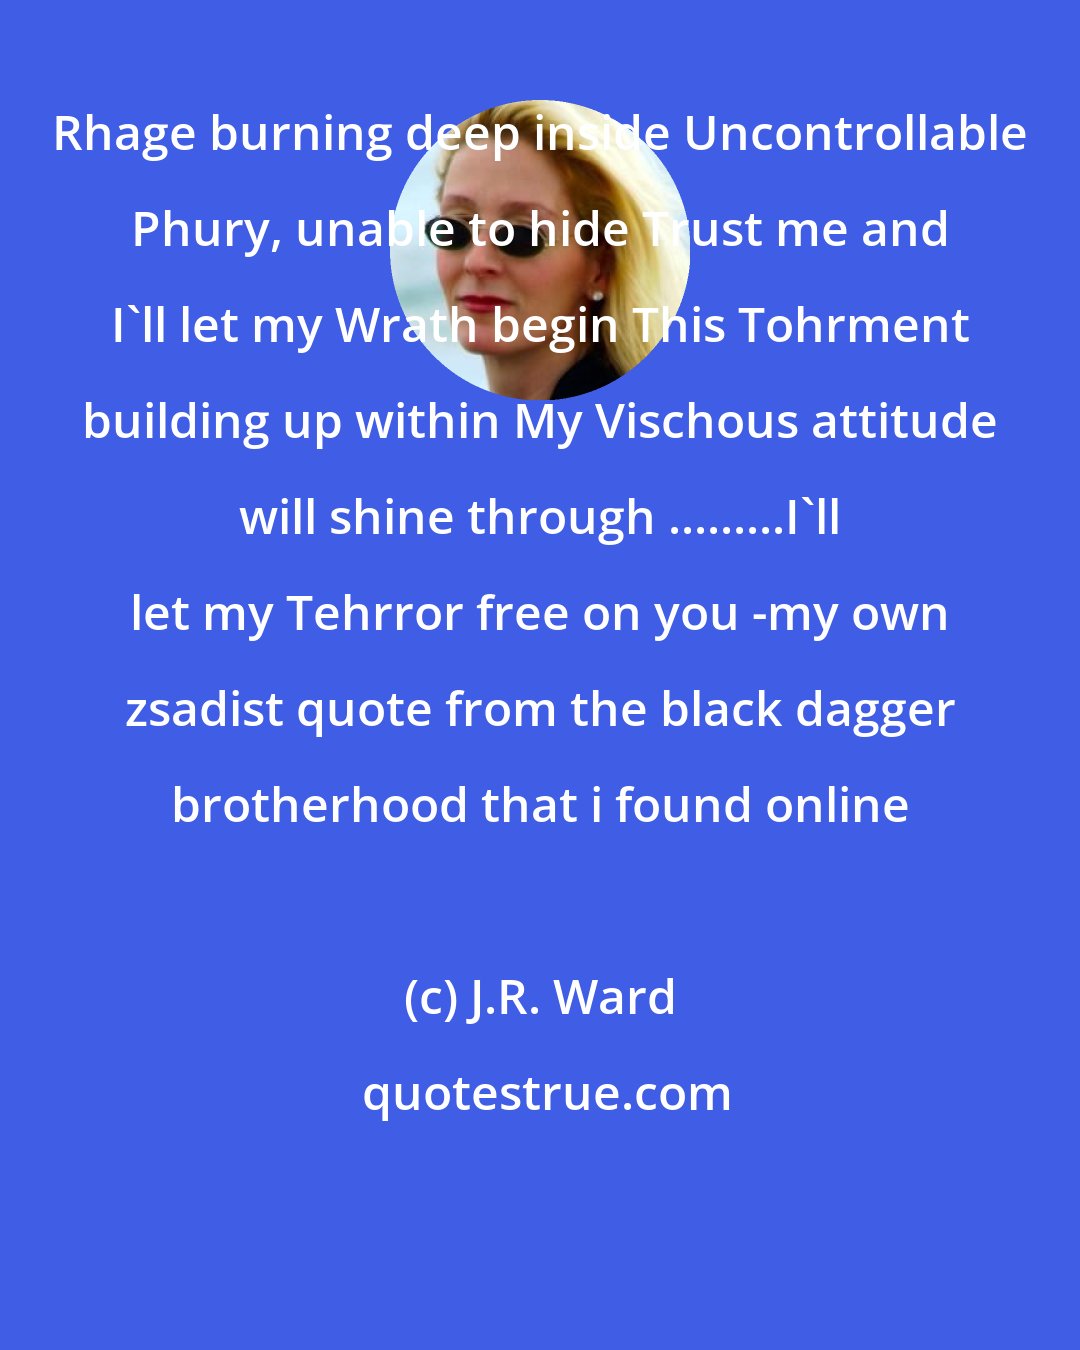 J.R. Ward: Rhage burning deep inside Uncontrollable Phury, unable to hide Trust me and I'll let my Wrath begin This Tohrment building up within My Vischous attitude will shine through .........I'll let my Tehrror free on you -my own zsadist quote from the black dagger brotherhood that i found online